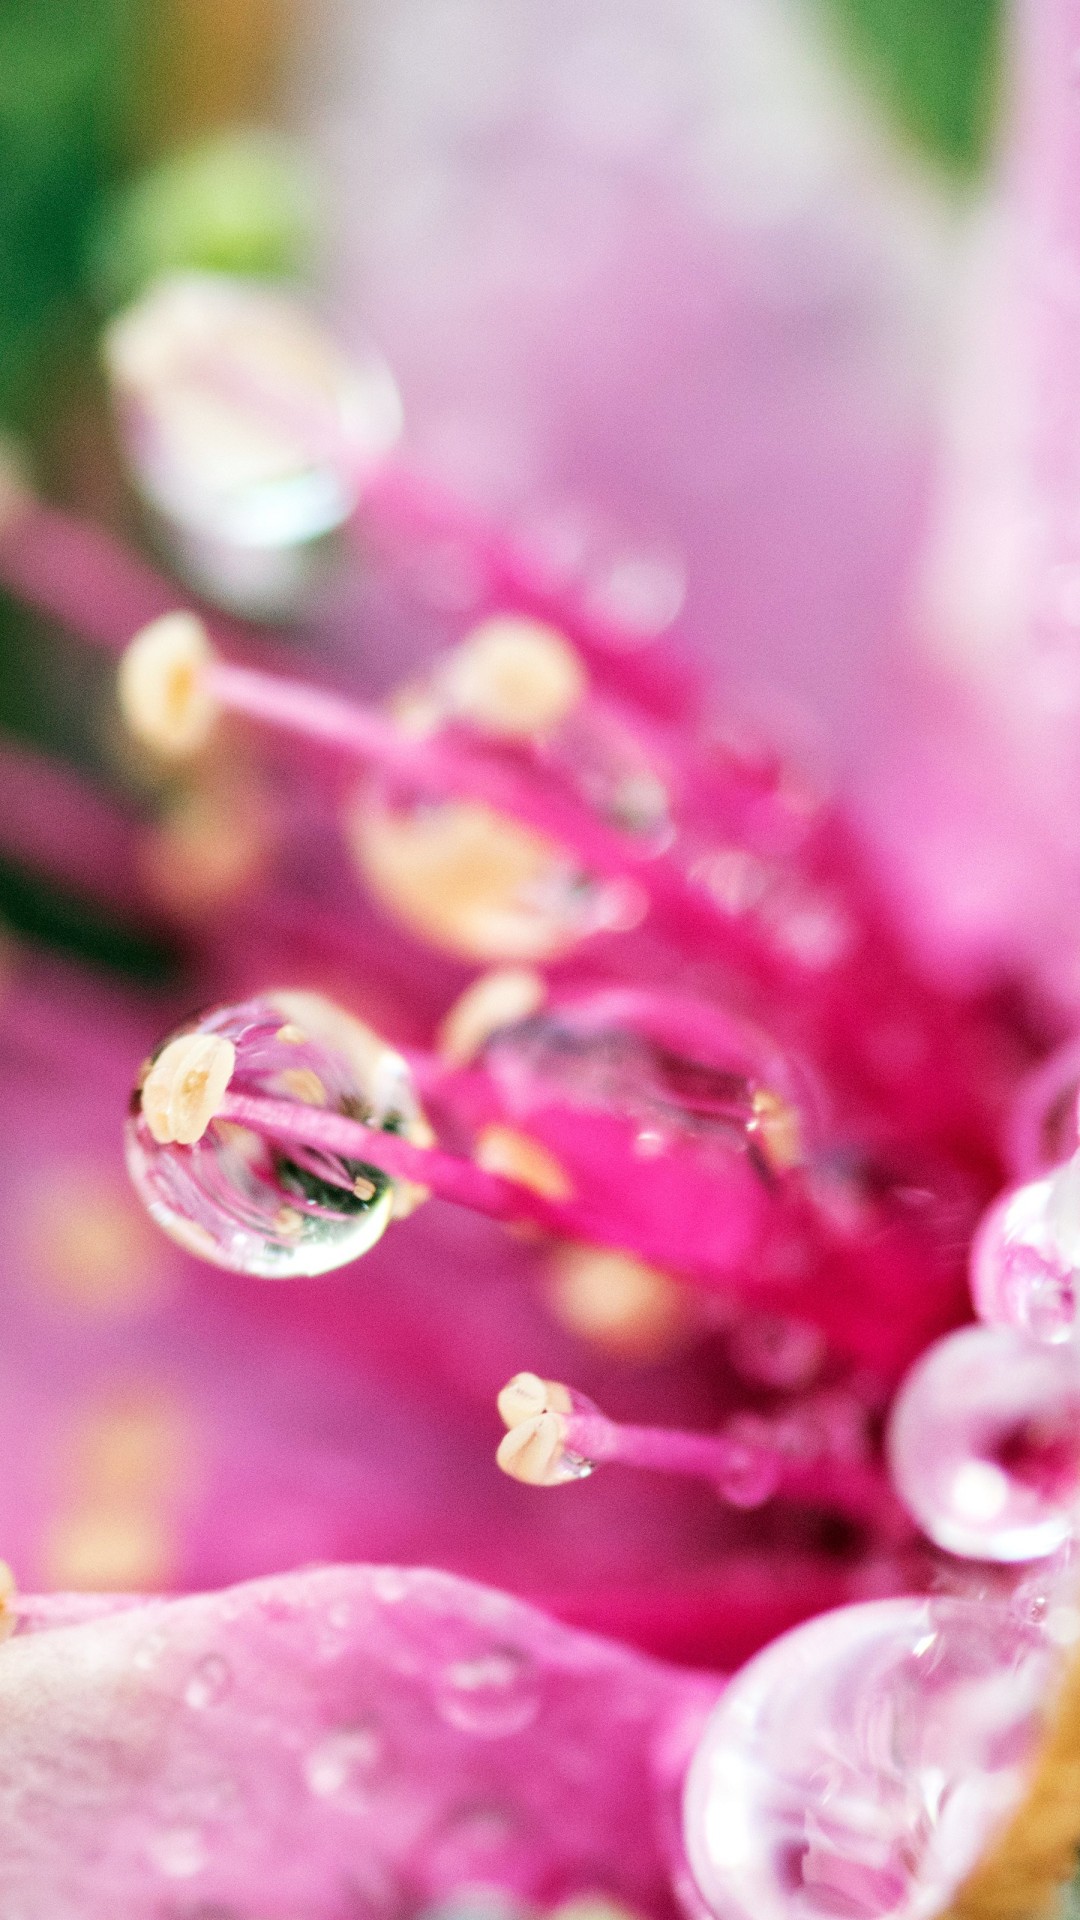 Flower Tears Wallpaper for SAMSUNG Galaxy Note 3